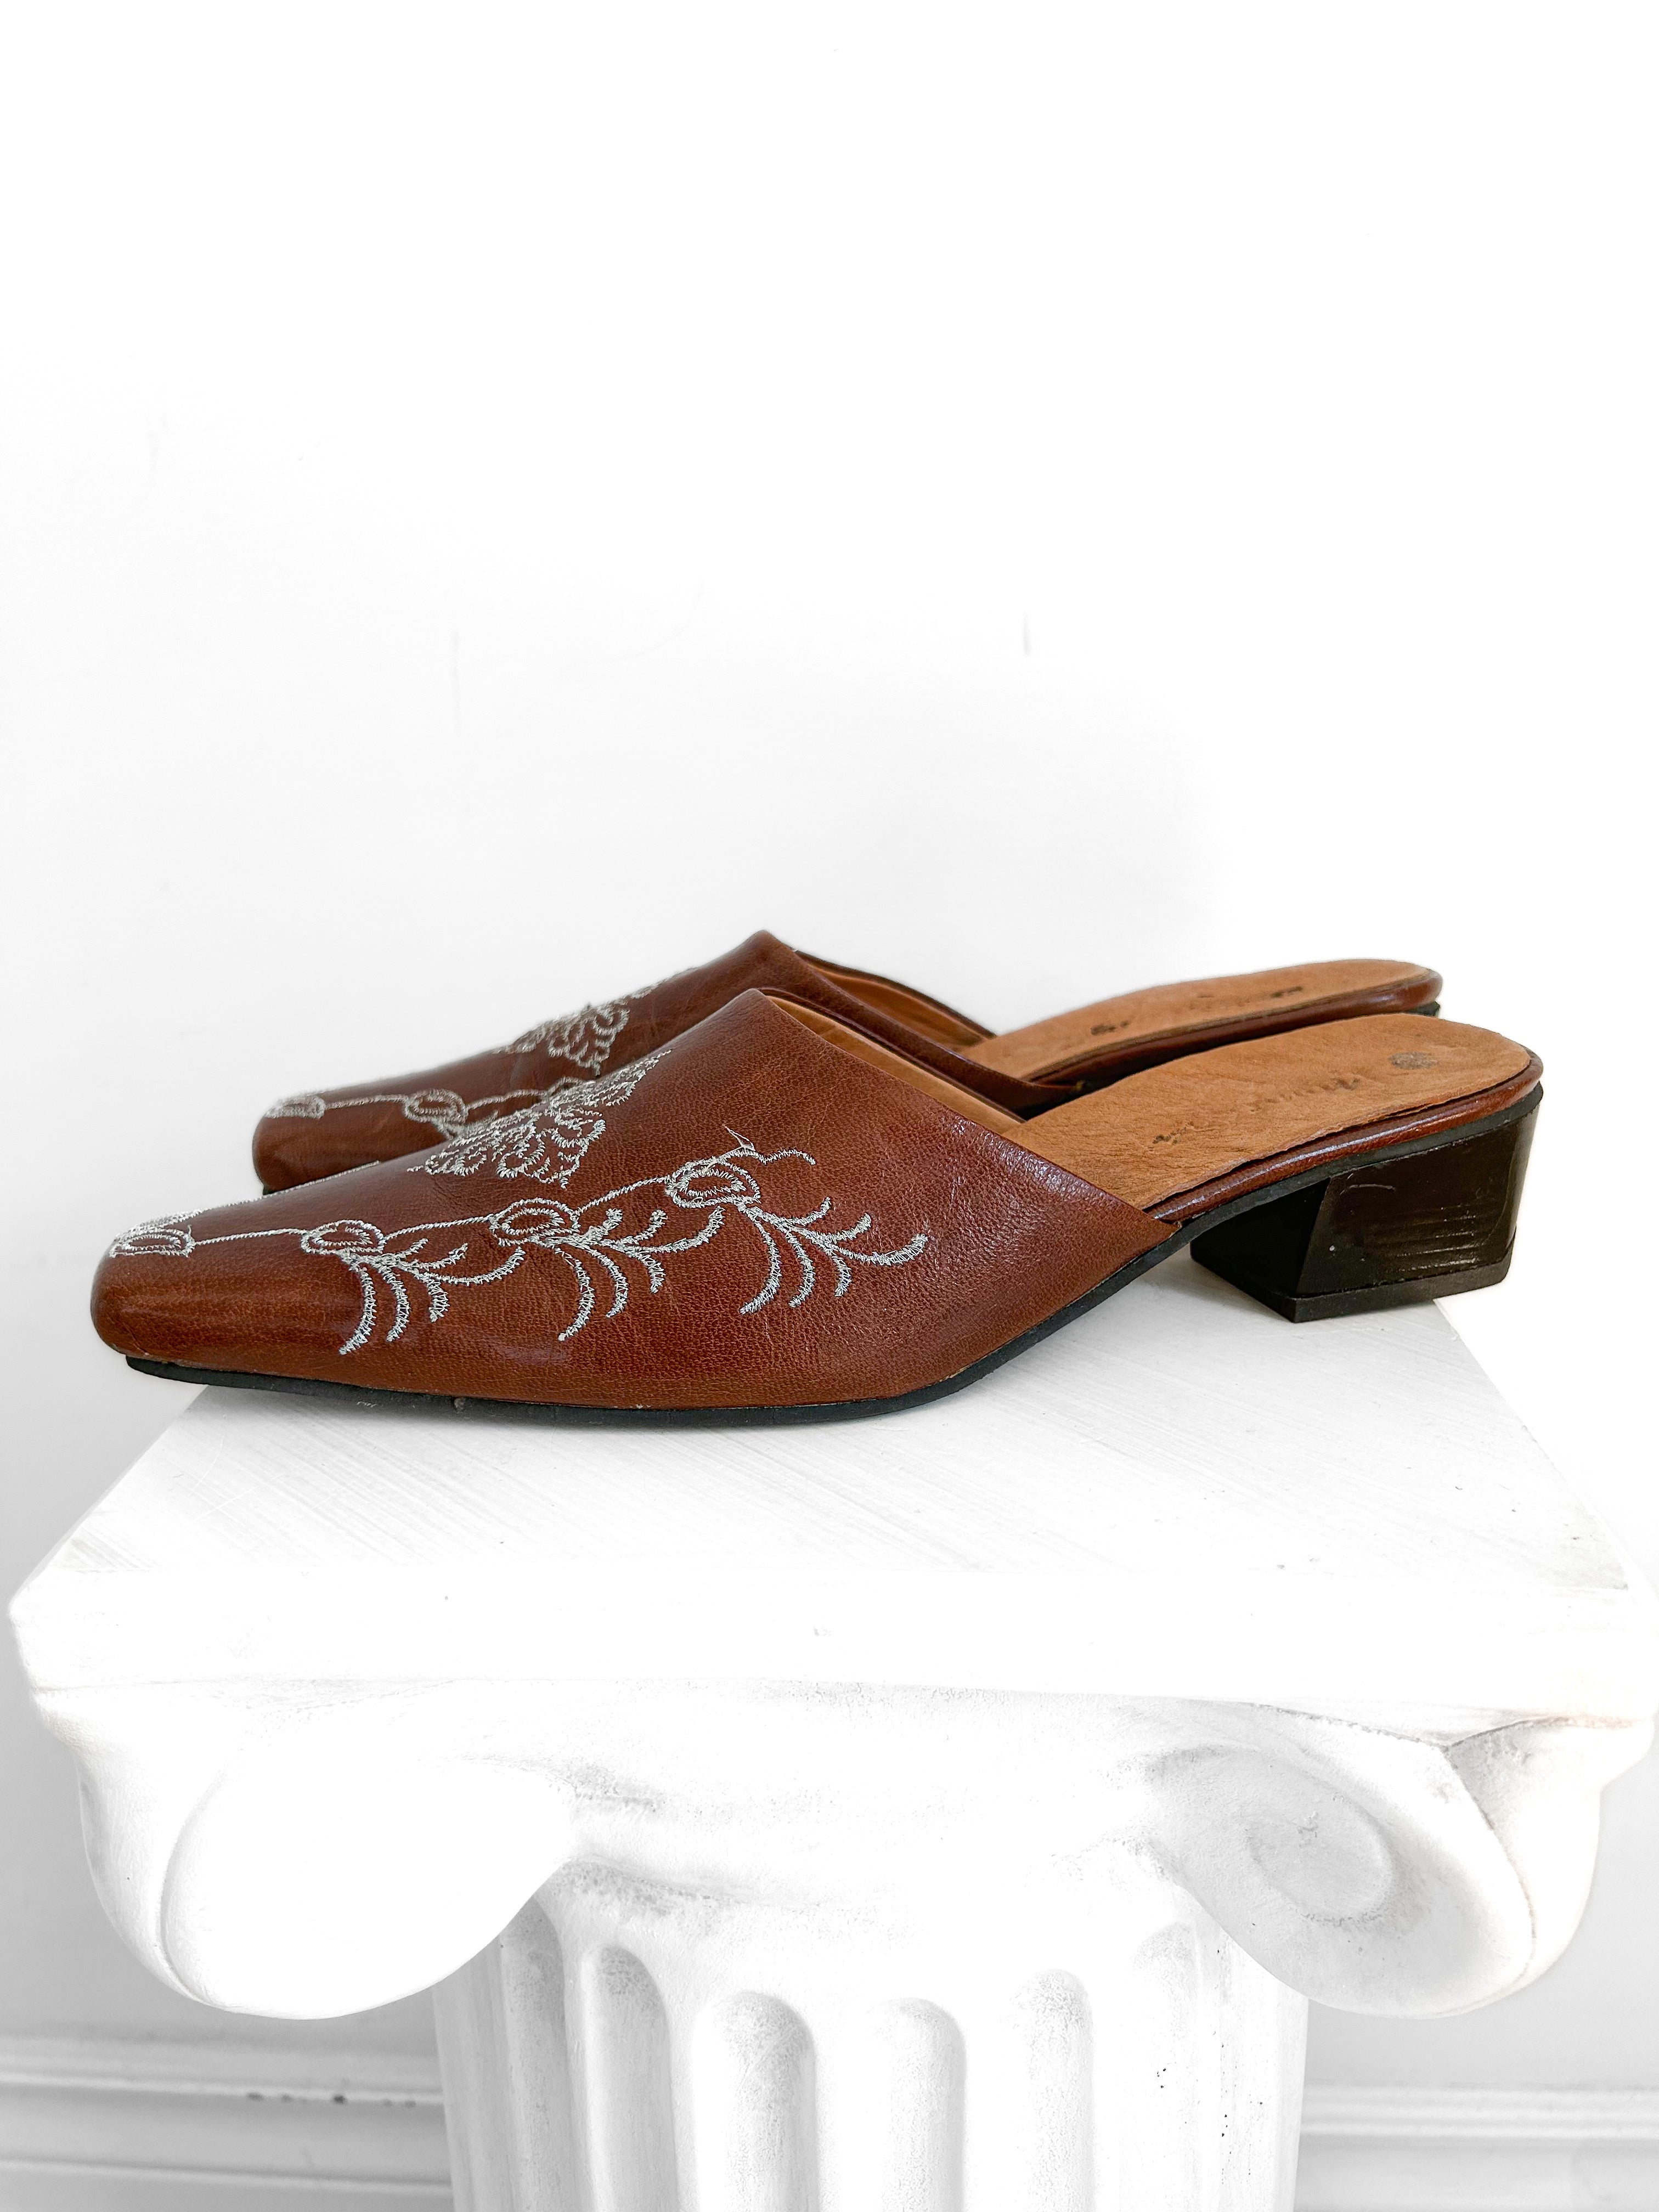 Post March / Size 8 / 7.5 Brown Leather Slip On Mules with a Low Heel and Pointed Toe